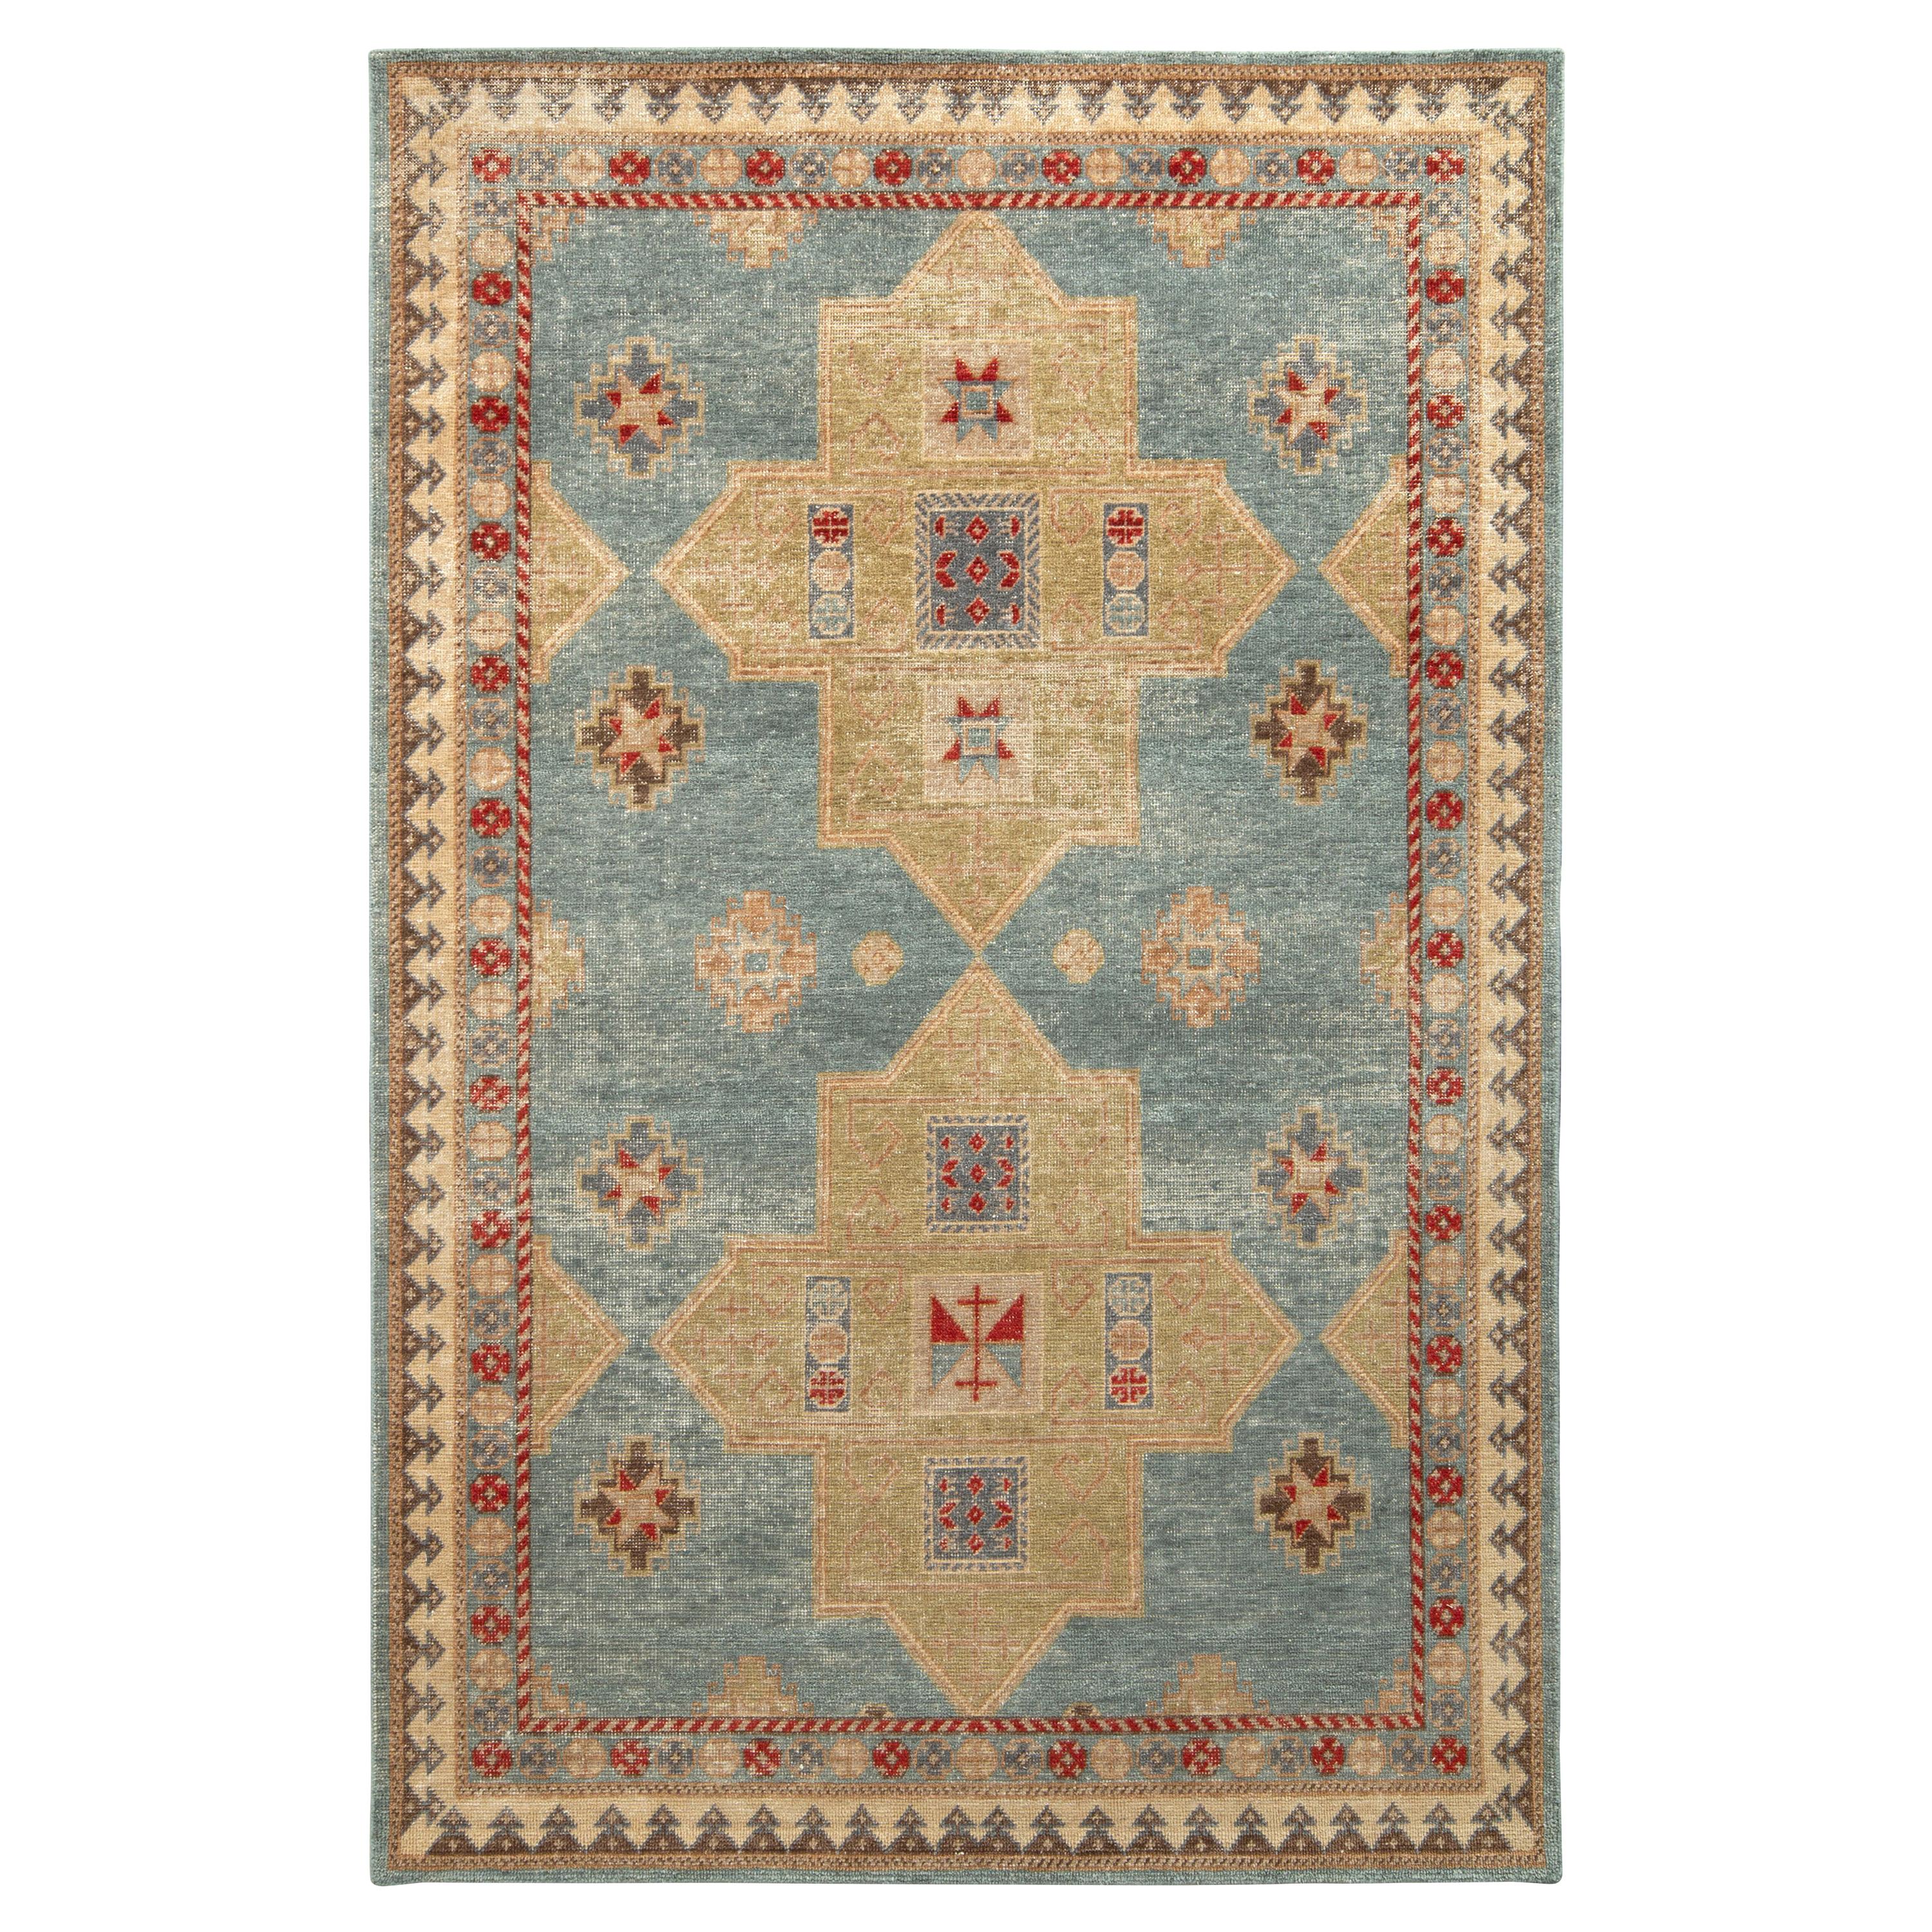 Rug & Kilim’s Distressed Classic Style Rug in Blue, Beige-Green Geometric Patter